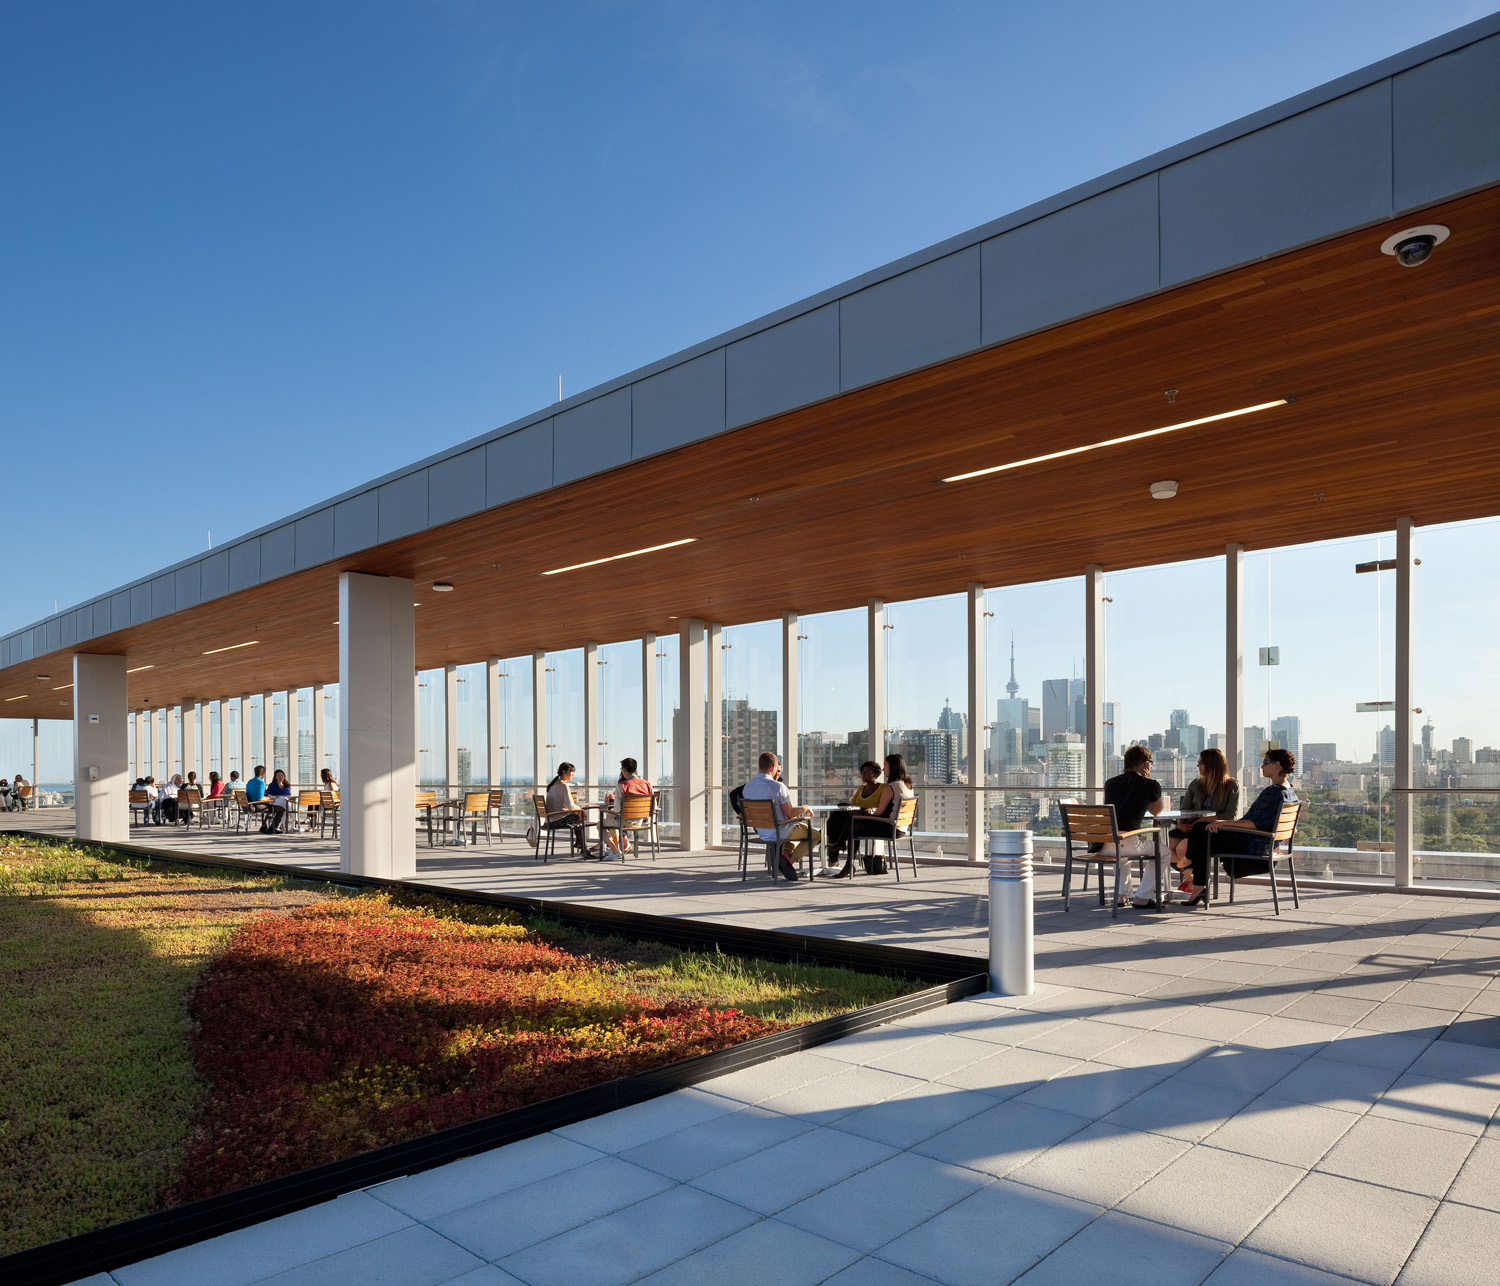 Rooftop Garden and Terrace at the Hennick Bridgepoint Hospital